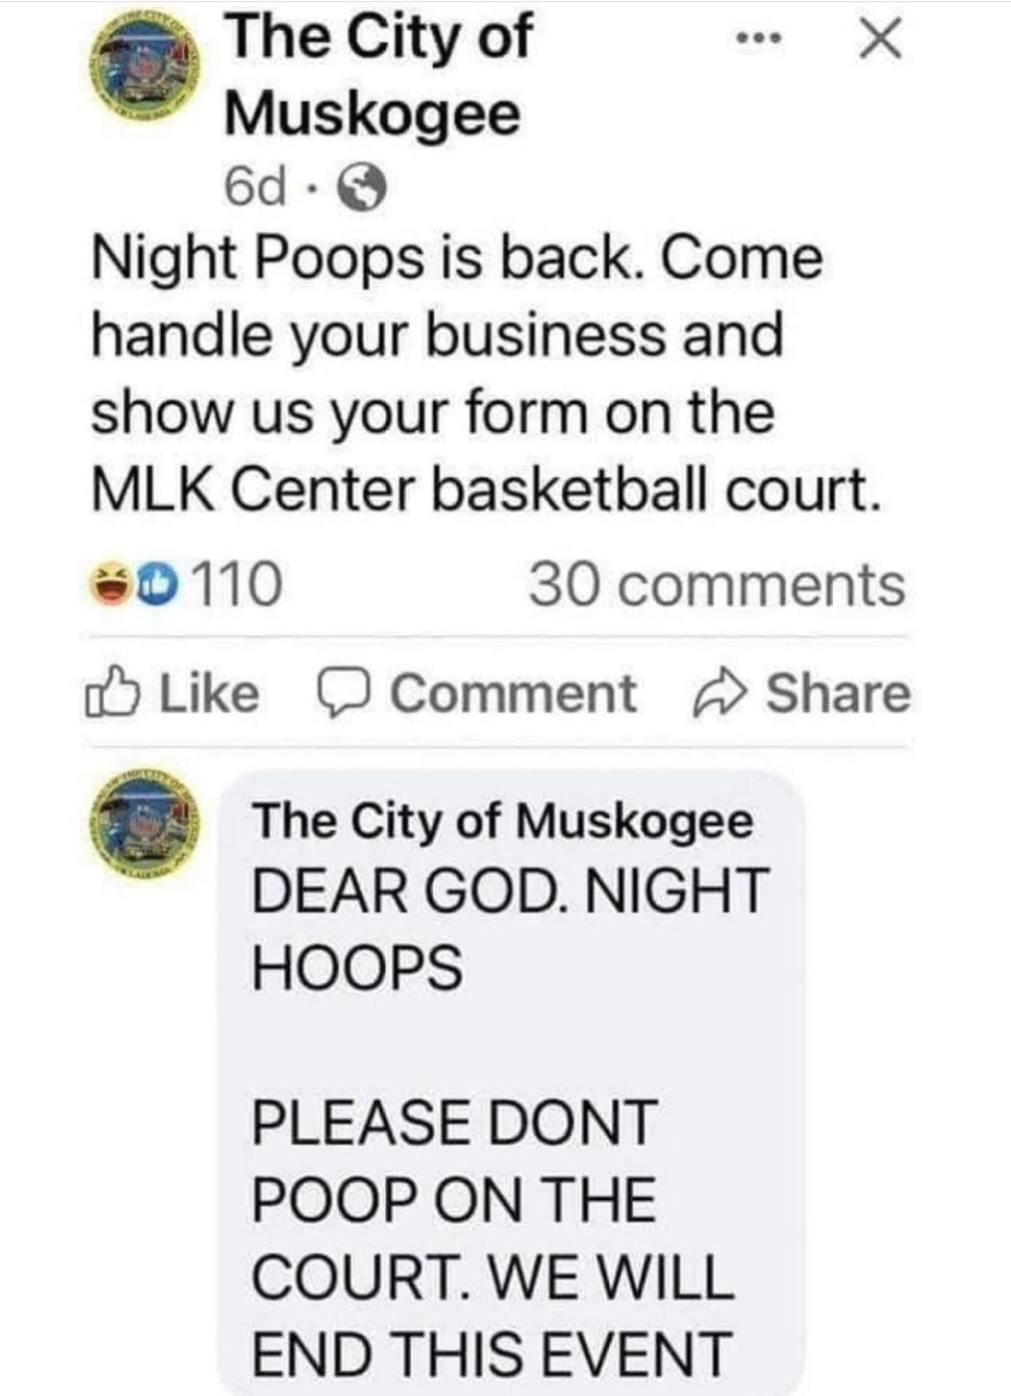 Facebook post from The City of Muskogee reading “Night Poops is back. Come handle your business and show us your form on the MLK Center basketball court.” Below it a comment from the same page reads “Dear god. Night Hoops. Please don’t poop ont he court. We will end this event.”